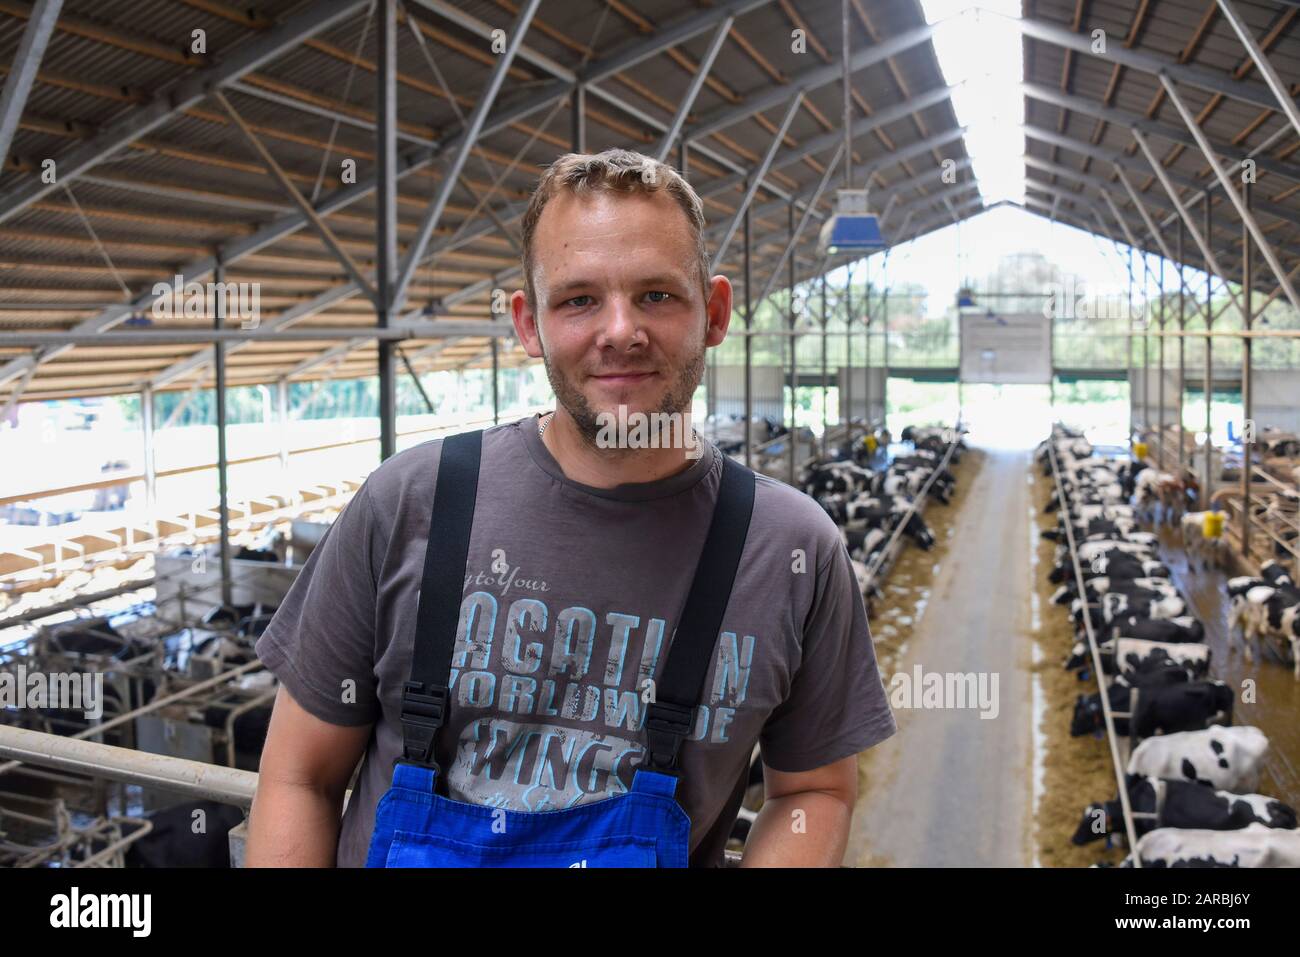 Hamersleben, Germany. 26th Aug, 2019. Sascha Blaik (32), managing director of the agricultural cooperative eG Hamersleben, is standing in a barn with dairy cows. Blaik focuses on 'digitisation in agriculture'. His dairy cows are guided alternately to their feeding areas, a rest area and the milking robots by means of transponders and automatic sluice gates. All fully automatic. Credit: Stephan Schulz/dpa-Zentralbild/ZB/dpa/Alamy Live News Stock Photo